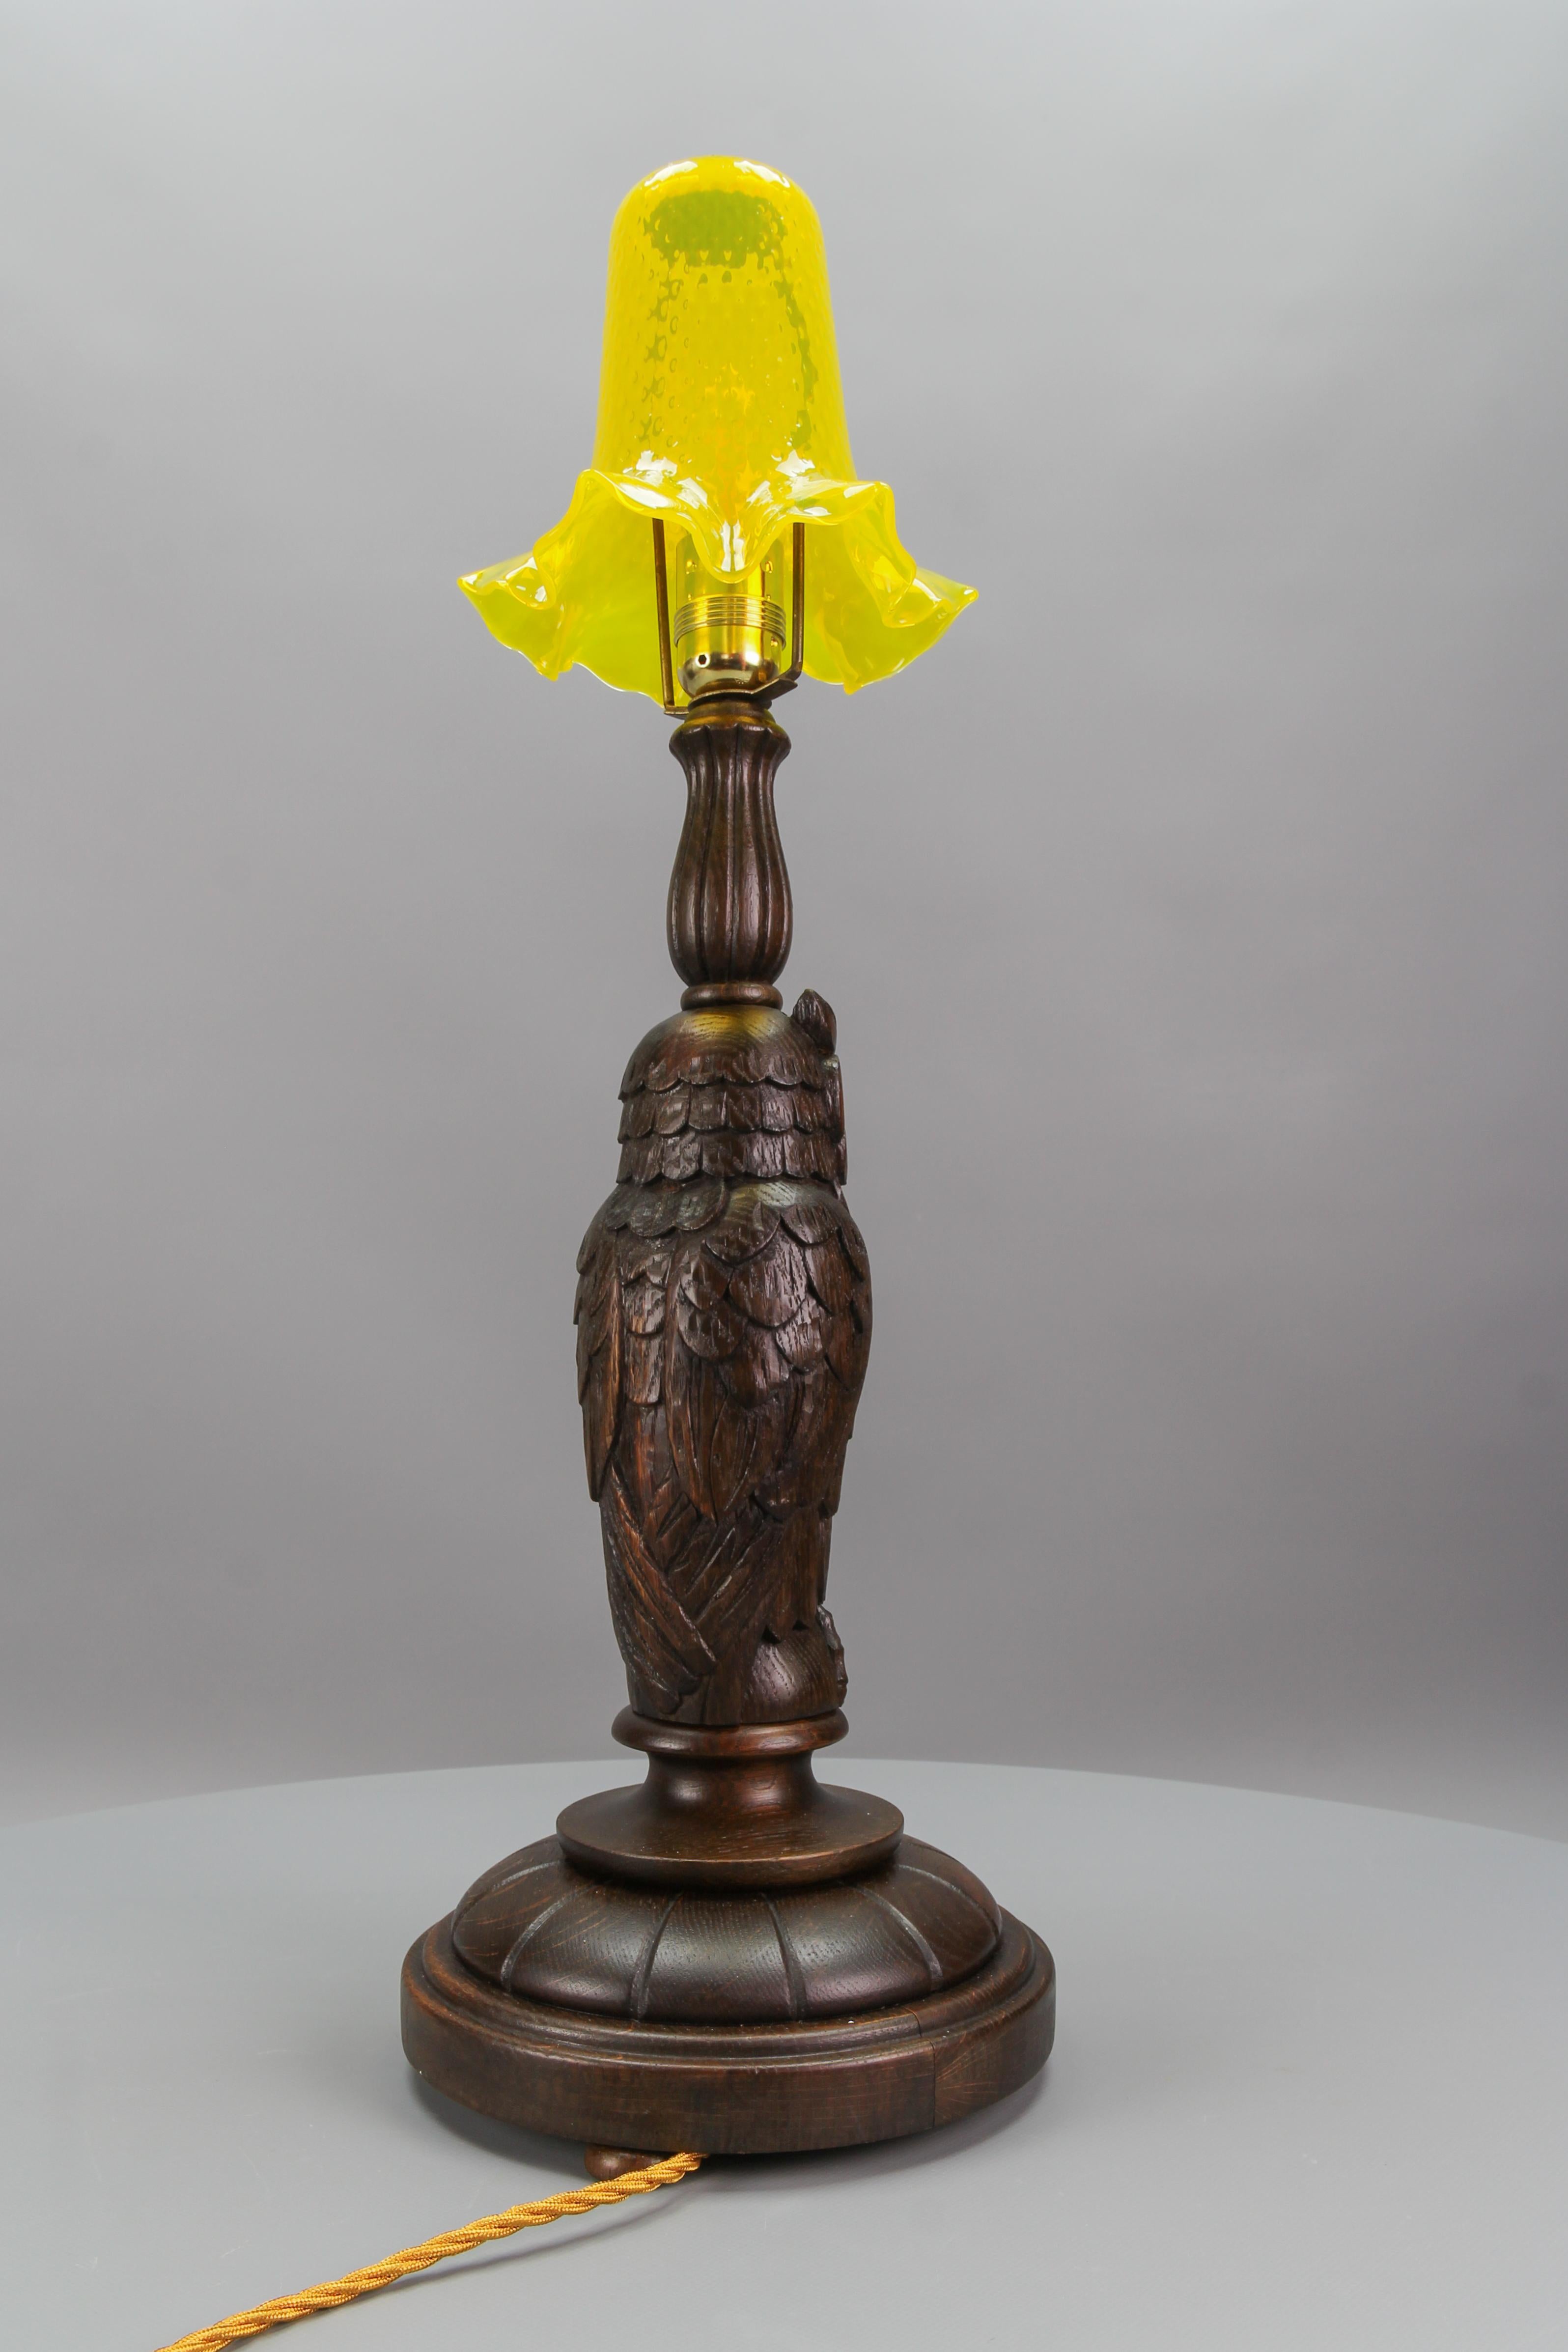 Art Deco Table Lamp with Owl Sculpture and Yellow Glass Lampshade, ca. 1920 For Sale 2